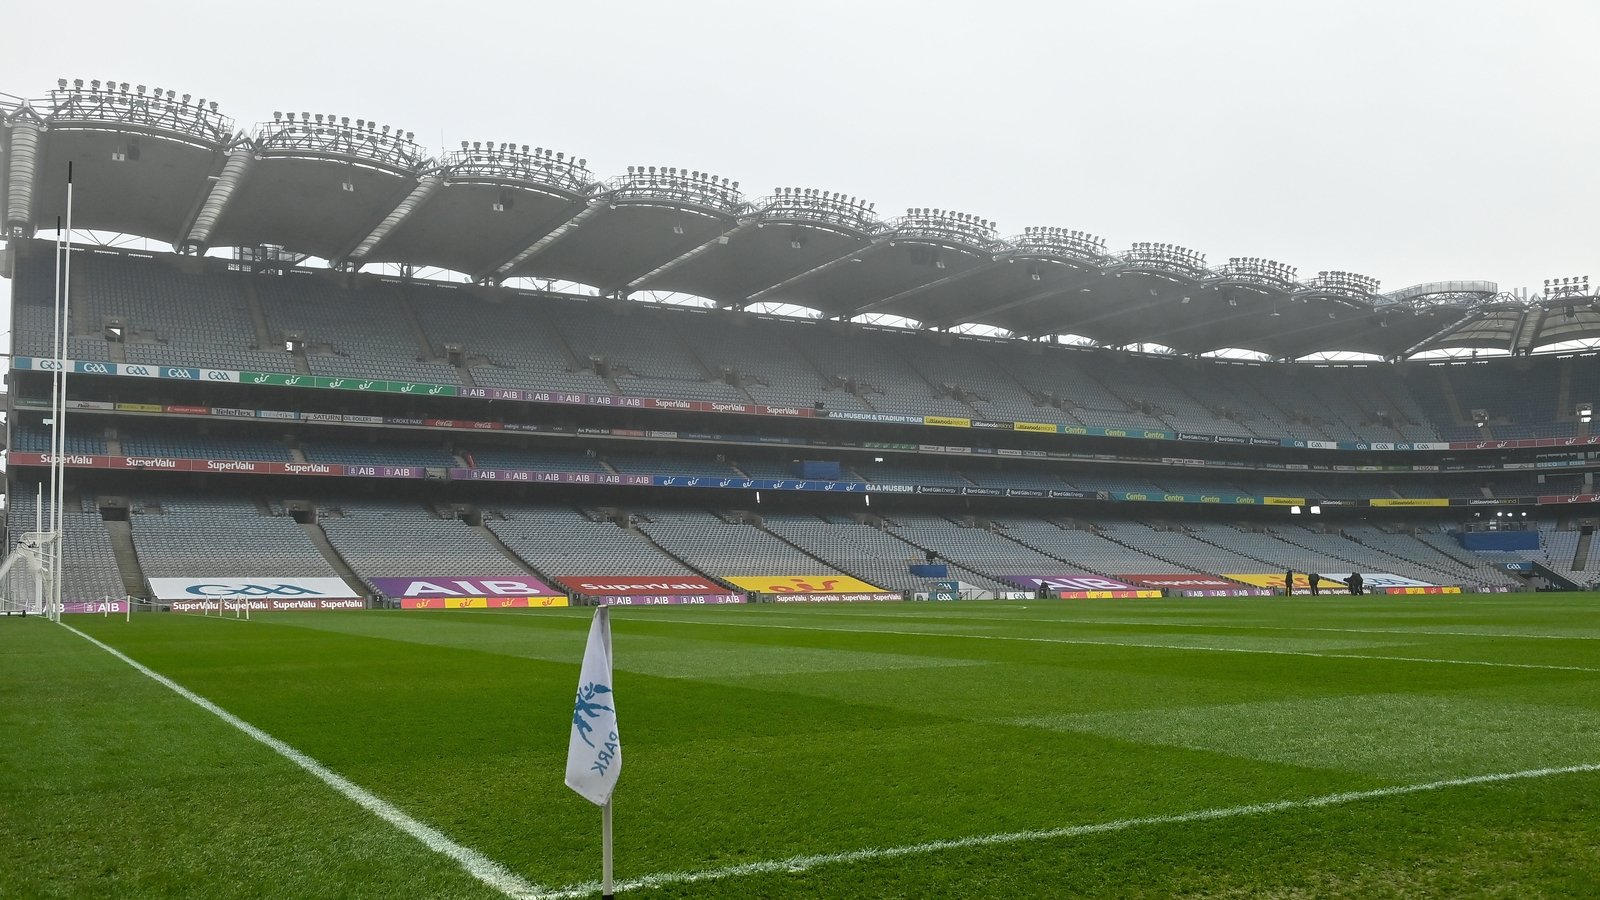 Garda is urging fans to abide by public health rules

